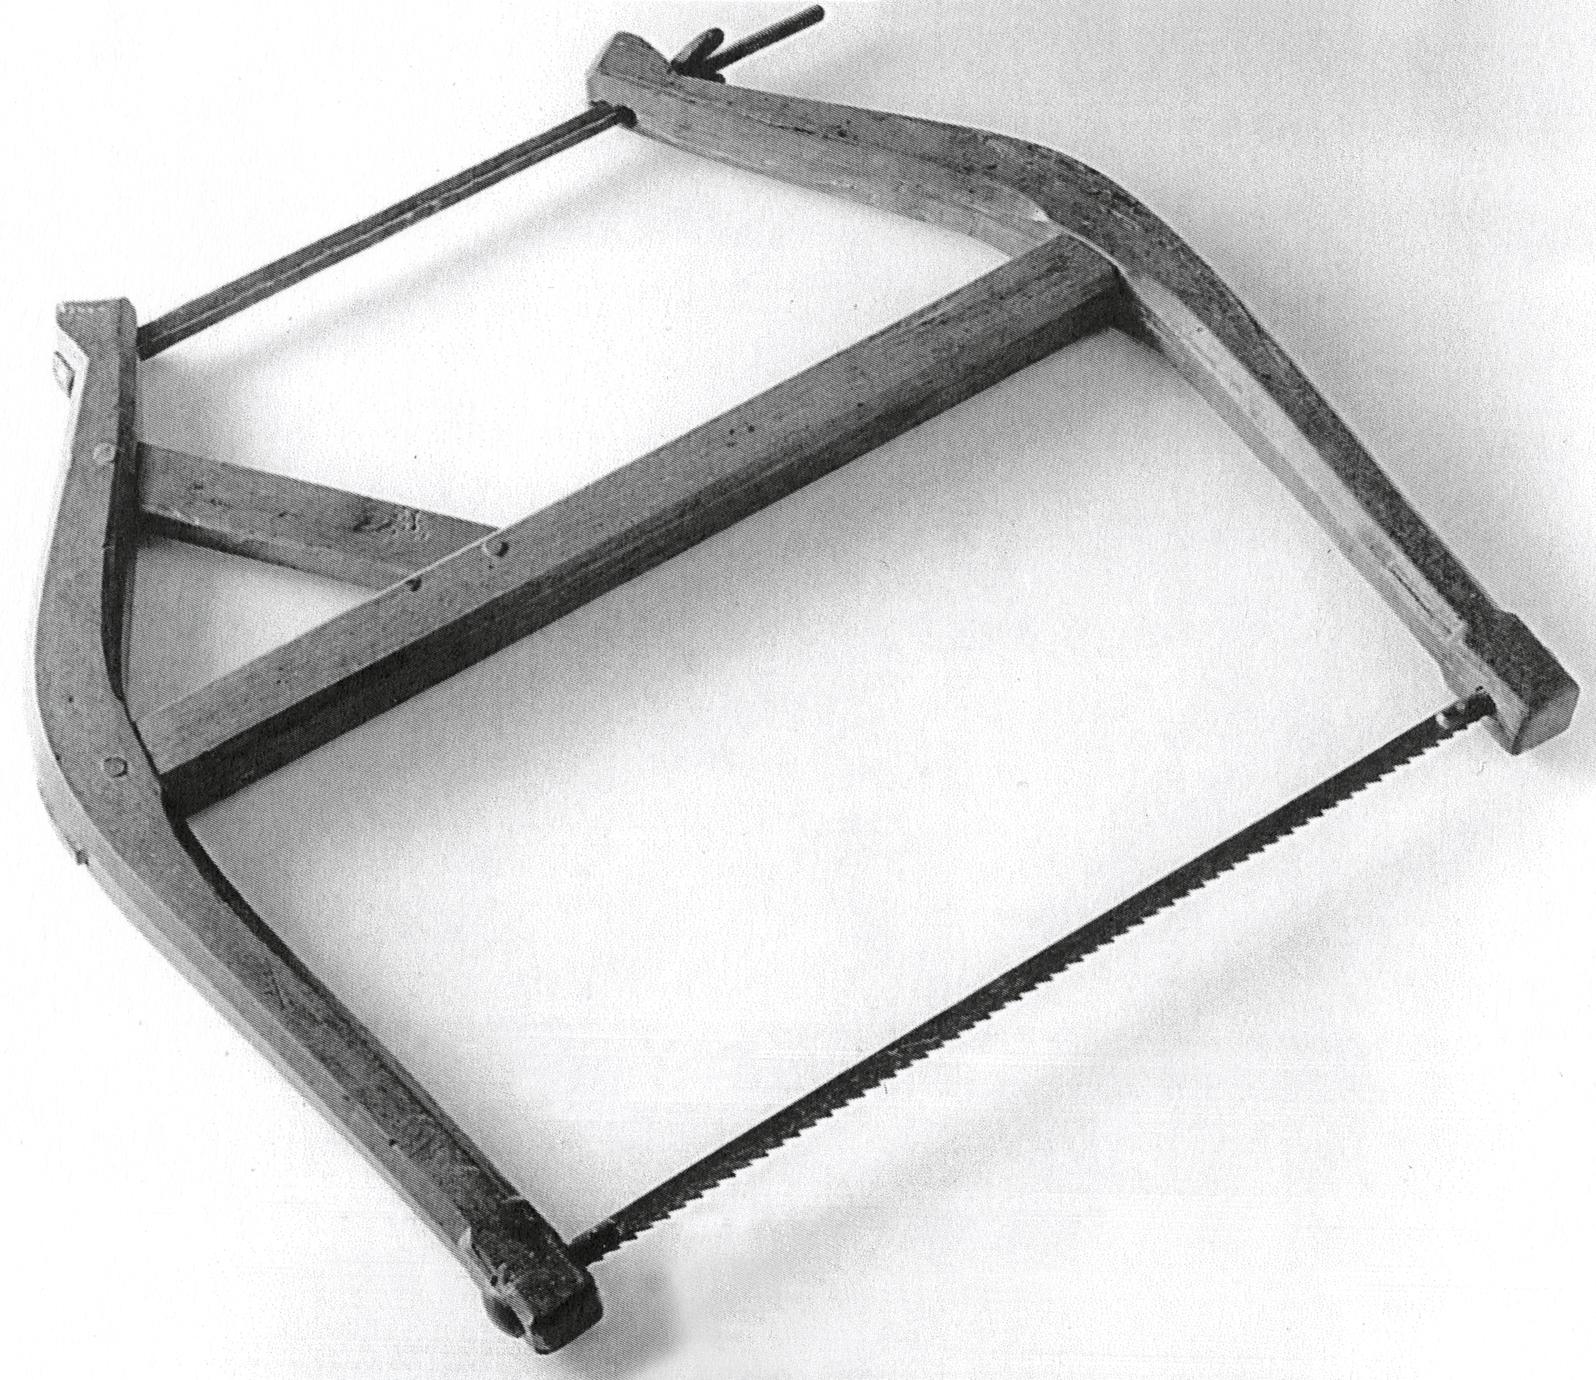 Black and white photograph of a bow or frame saw.